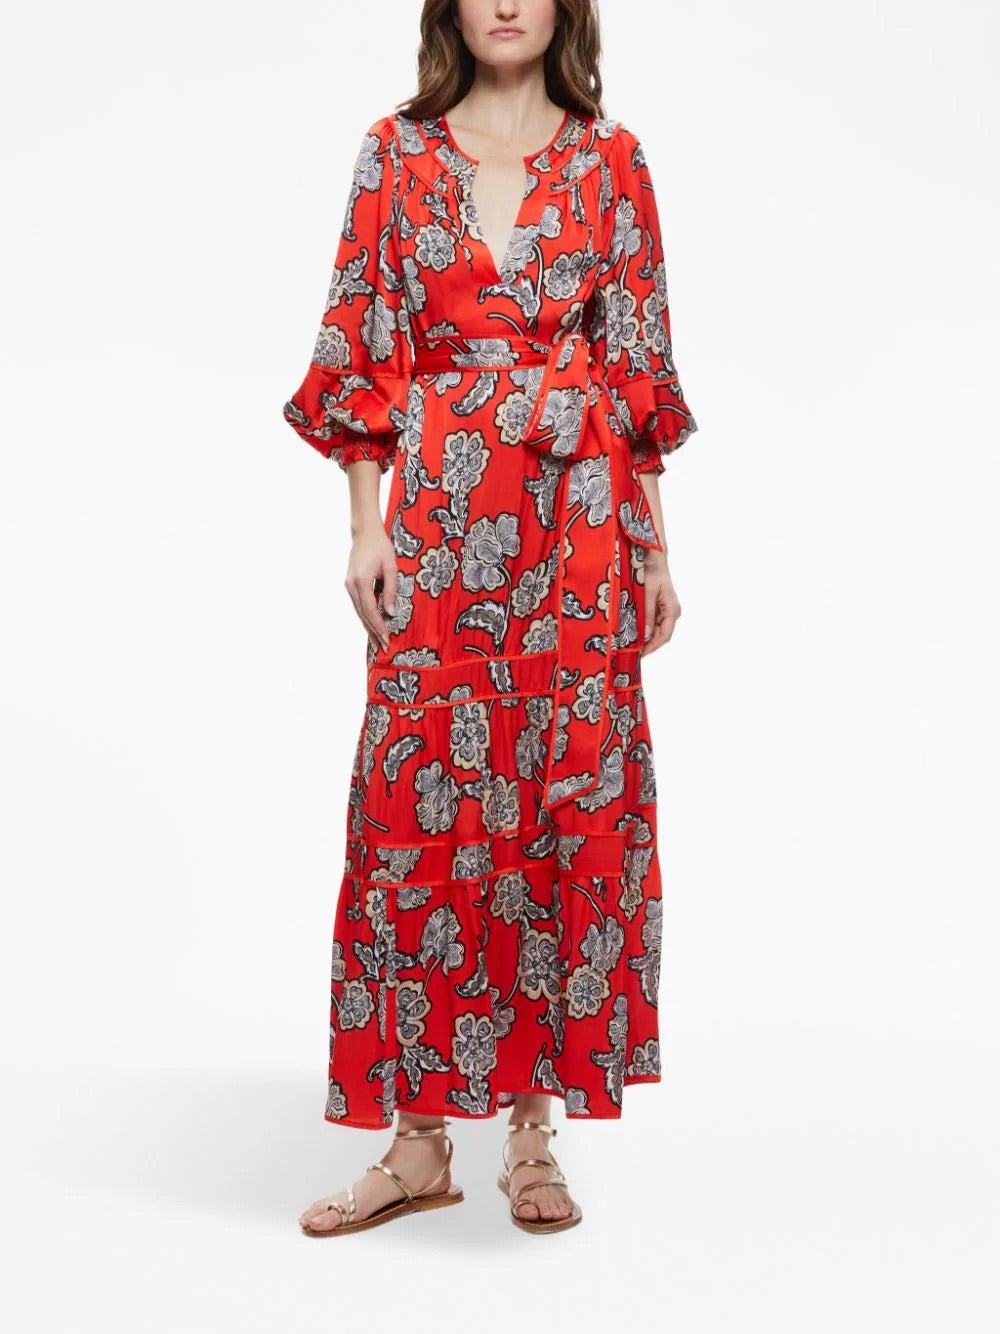 Red Floral Maxi Dress - XS